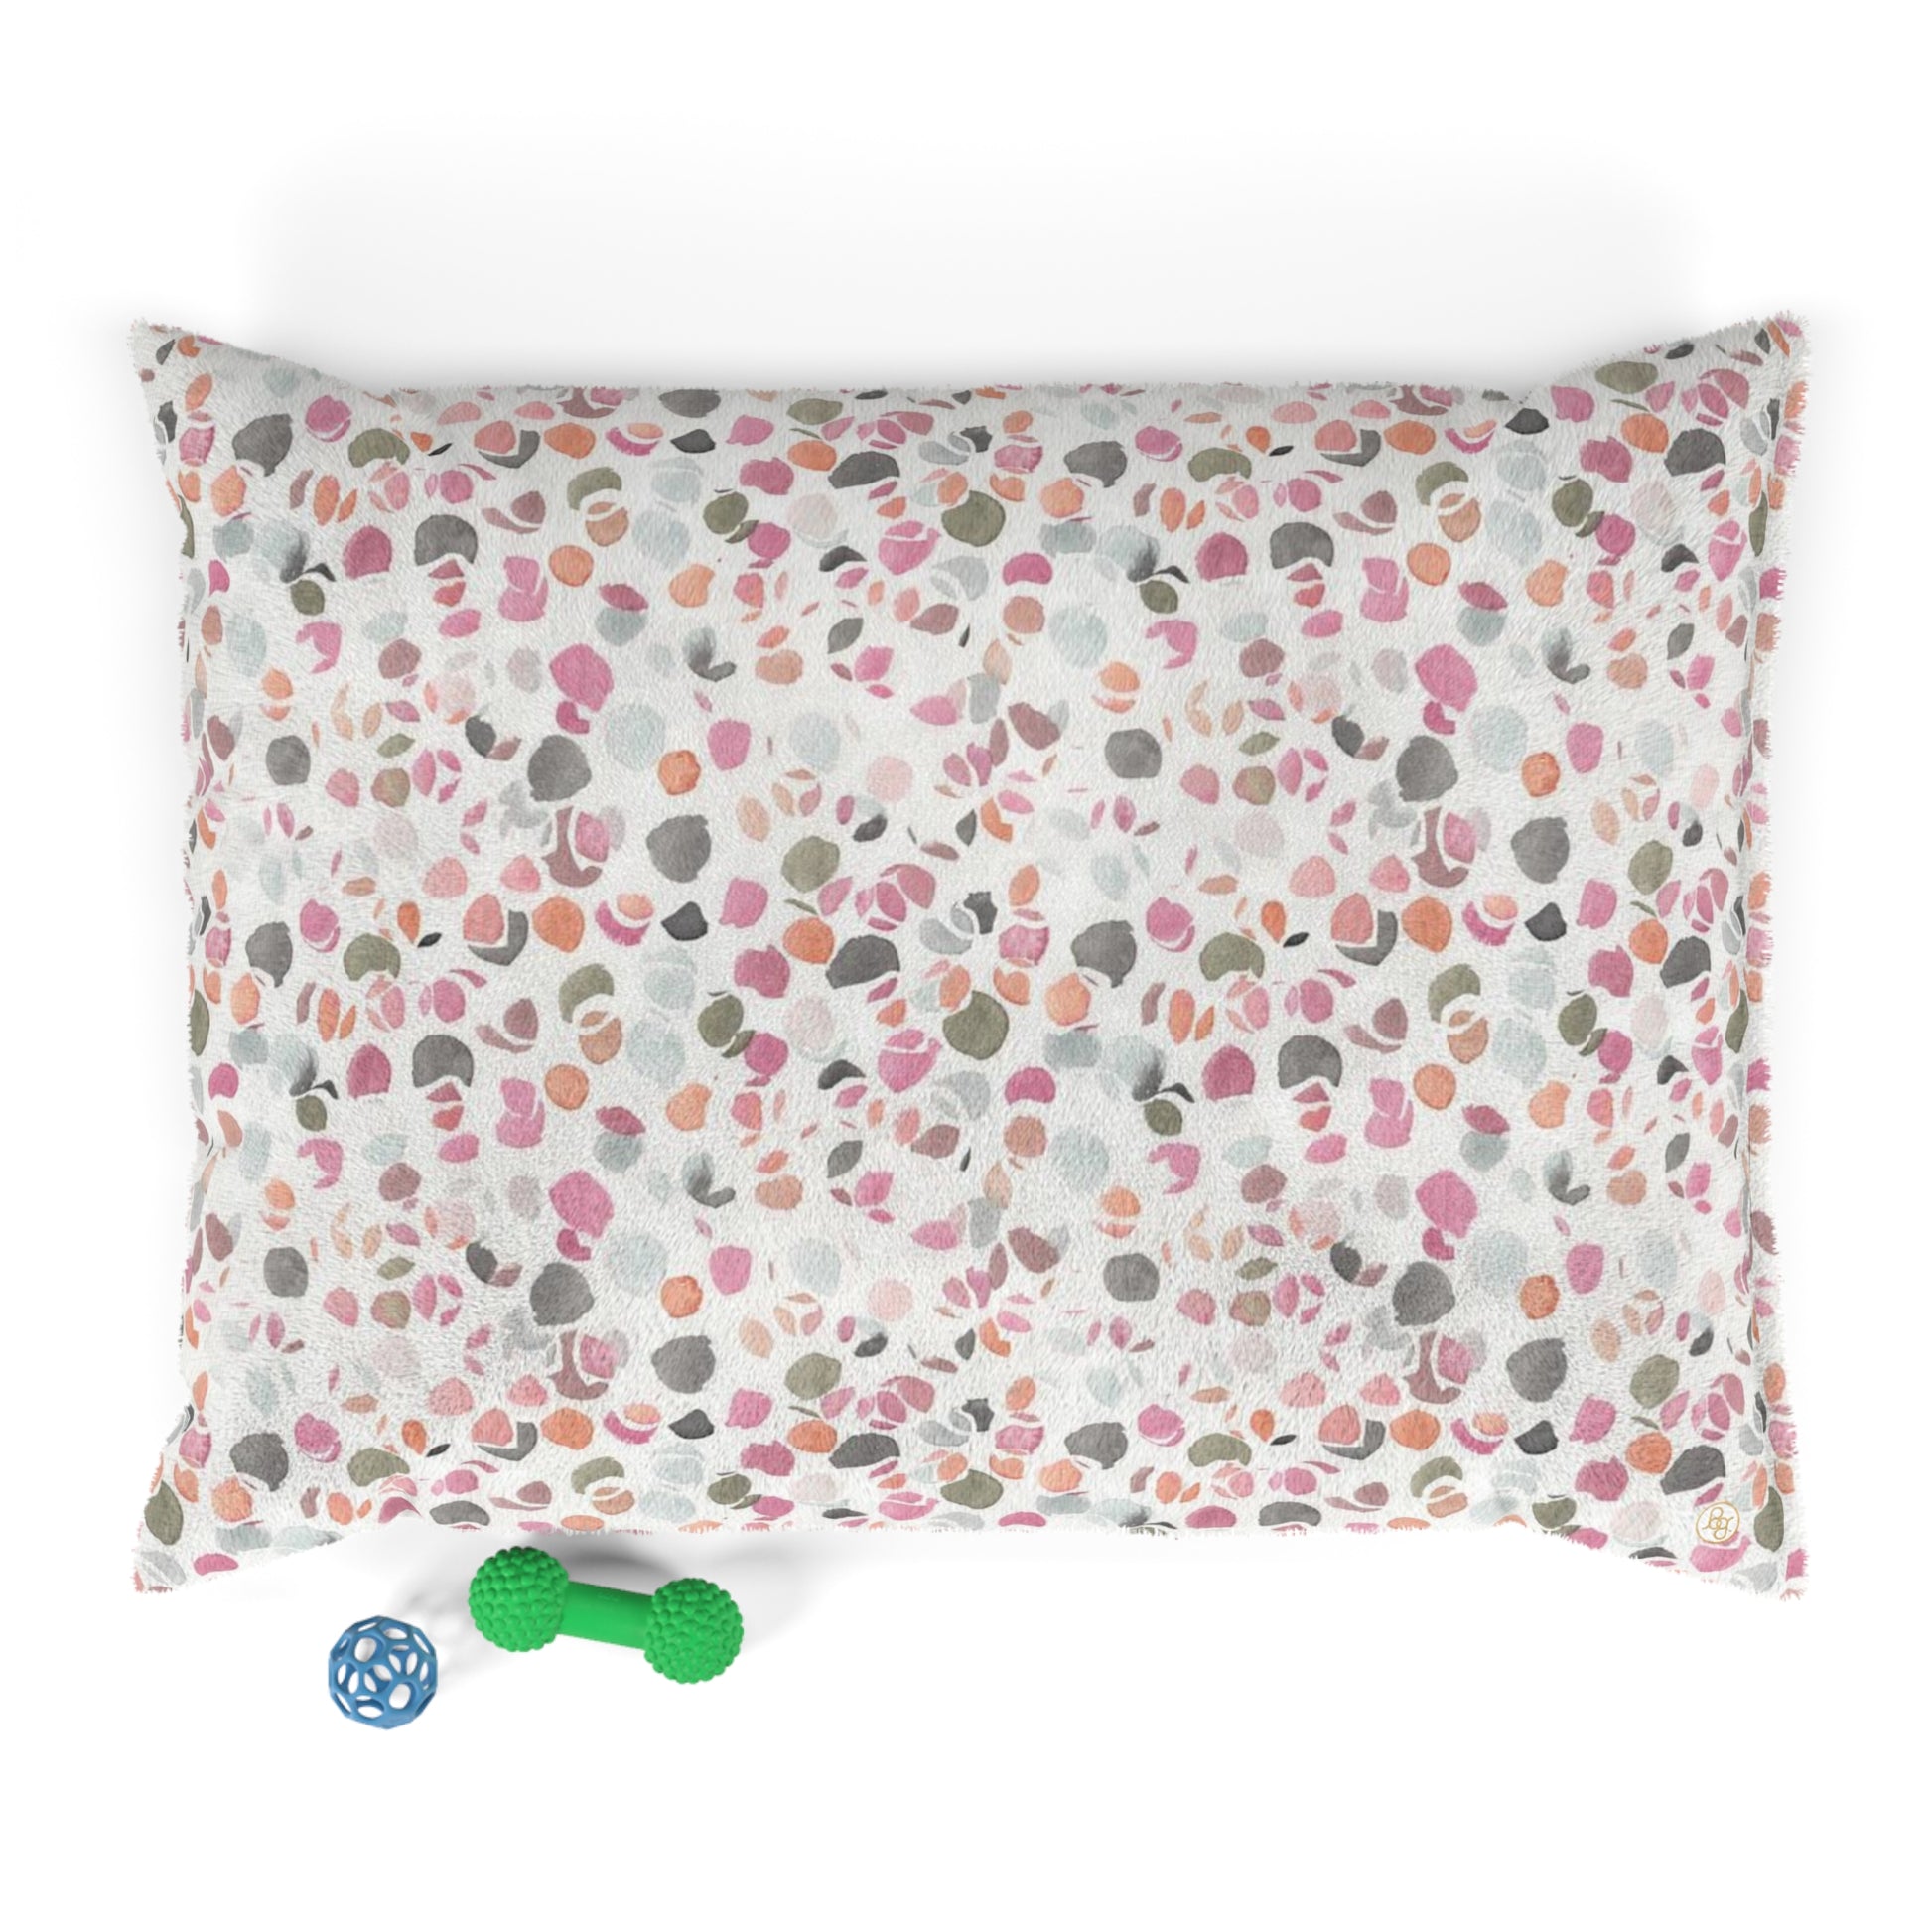 Fleece dog bed featuring an abstract floral pattern in shades of pink